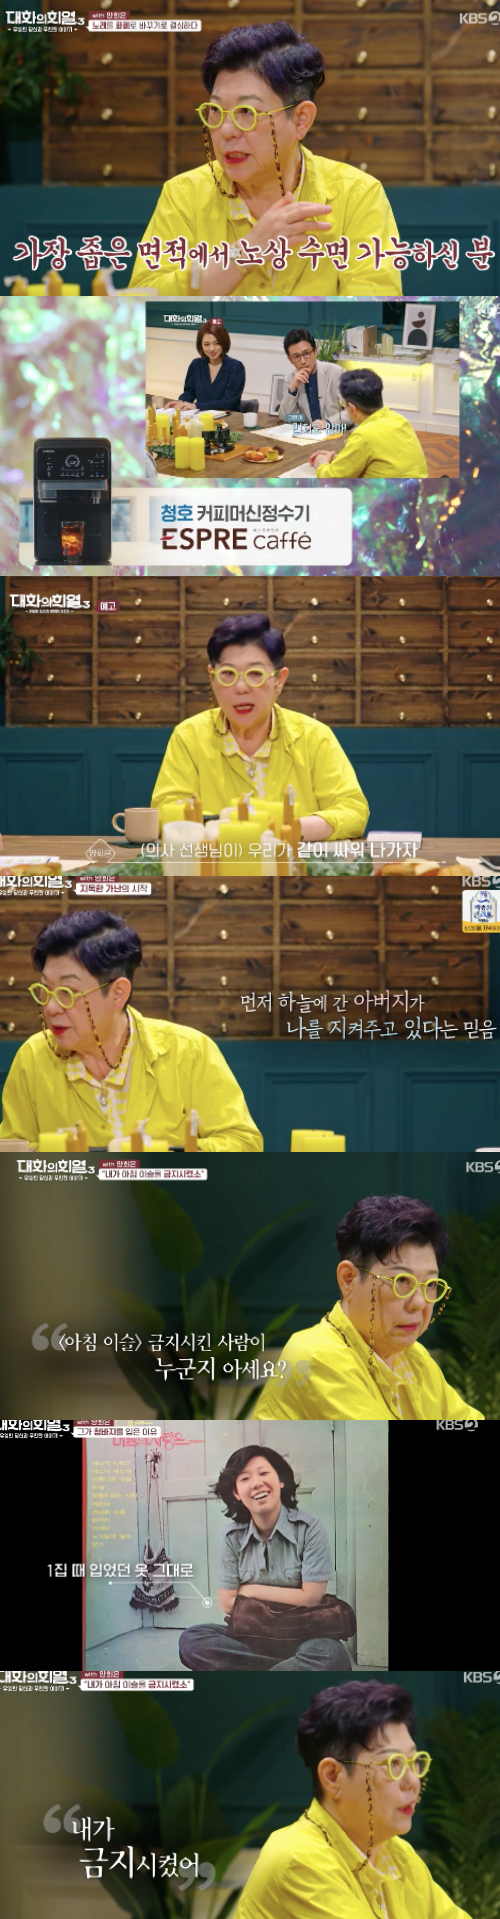 In the Hye-Yeol 3 of Dialogue, Yang Hee-eun predicted an anecdote that was judged to be three months in the end of the ovarian cancer from his childhood when he was the girl.Singer Yang Hee-eun appeared on KBS 2TV entertainment The Joy Season 3 of Dialogue broadcast on the 24th.Yang Hee-eun, who visited the Gong frog in Myong-dong, recalled the days of his life, saying, It was a house of young people who could not go, one day Friend wrote my name on the note that there was a best friend in school, and I was singing on the stage. I was surprised.In the meantime, Kim Min-ki, Seo Yoo-seok, said the senior who was giving it to him, and You Hee-yeol was surprised that it is the beginning of Korean music ties.Yang Hee-eun, who visited Kim Min-ki small concert, said, I first wanted to learn the song Morning Dew, and after the performance, my cleaning lady had a torn score and I got it and practiced it alone at home.Yang Hee-eun, who had lived in poverty at the time, said, I have never dreamed of being a singer, and I walked the path of Singer to get out of my life.I wish I could sing Morning Dew on my first album, and Kim Min-ki allowed me to, Yang Hee-eun said. When I never thought about the song becoming a currency, there were years of how to sing for money.In the meantime, he said that he was born with 10 songs in the first album.In 1971, he asked about the reaction of Yang Hee-euns first album, the first album.One day, on the radio, I heard a morning dew on the bus, and I was so surprised, but it didnt sound like my voice, I couldnt forget it, no one knew me, but my heart was pounding, Yang Hee-eun said.Yang Hee-eun, who has worked with Kim Min-ki for a lot of songs since then, said that famous songs were poured in 72 years.When asked what Kim Min-ki was like to Yang Hee-eun, he said, My idol, all of it, shone like a star. Unlike romantic lyrics, it was a song that had to be called for a living, but you kept clear without compromising music and reality.I realized that the position I was standing in was different later.Yang Hee-eun was a symbol of Blue Jeans, and he recalled, I did not have the power to handle stockings, I was from a family that was completely ruined because of the difficulty of stockings that I often go out in difficult circumstances.Yang Hee-eun said, There were some seniors who were angry that they were polite, saying that they dared to come up on stage wearing sneakers and blue jeans. There is an emotion that was such a sacred place.Anyway, the first woman in Blue Jeans, whatever she said, was Blue Jeans, Yang Hee-eun said. I didnt have to dress because the guitar was covered up.Yang Hee-eun went on to confess that he was the girl, saying his father died in two years due to liver deterioration.Yang Hee-eun said, My father died at the age of 13, and the time left with my stepmother was harder, and the conflict was severe.Yang Hee-eun, who was wandering even more after his father died as a high school girl, said, I went to my fathers oxygen and reported the Spies, and I was taken to the police station to check my identity. I do not believe that I went to my fathers oxygen.It was an absurd case that Misunderstood with The Spies.Yang Hee-eun said, I went to Song Chang-sik on the day of the bad news, asked me to go to the live cafe of Lee Jong-hwan and I passed the audition. After that, I asked for a payment, and I received a salary of 40,000 won,On the stage that Song Chang-sik gave up for 10 minutes, Yang Hee-eun expressed his gratitude to Song Chang-sik, who recognized himself as the only person who recommended someone is the first and last person who should have sang, whether the house is ruined or not.You Hee-yeol was surprised that Song Chang-sik also found Yang Hee-eun, a similar situation, who was homeless at school when there was no contact theft at the time.I had no hope, Yang Hee-eun said, the amount of debt was two houses, and I had no hope. When I sing like a days stamp, I never touched the money because I took it under the pressure, so I had a nickname and a right to recover it, but those times were manure.If you have a fathers soul, I believe you will protect me, and I have a great power, Yang Hee-eun said, I was afraid, but I thought others were scared. You Hee-yeol said, Im sad, Im sick.On the other hand, while referring to Myeong-dong Obis Cabin and continuing to recall the past, Yang Hee-eun said that morning dew and evergreen water are still unresolved homework.Yang Hee-eun, who had been told by a doctor that he could only live three months at the end of the ovarian cancer, said, The doctor wants to fight, but he does not want to die, he does not want to die, he does not want to live.The Joy of Dialogue 3 Capture